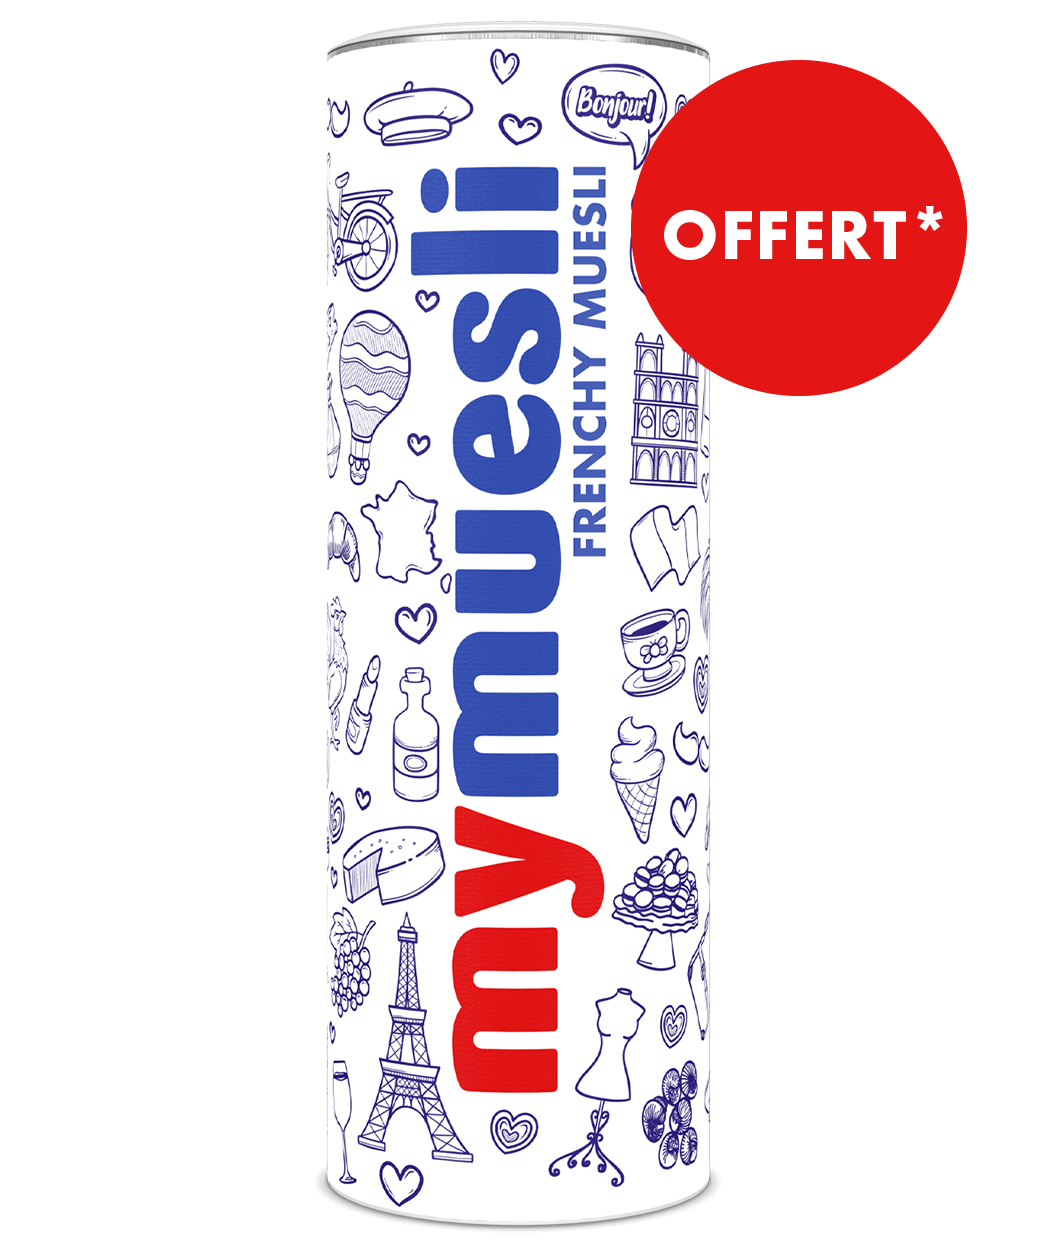 product-app-muesli-offert-frenchy-summer.png